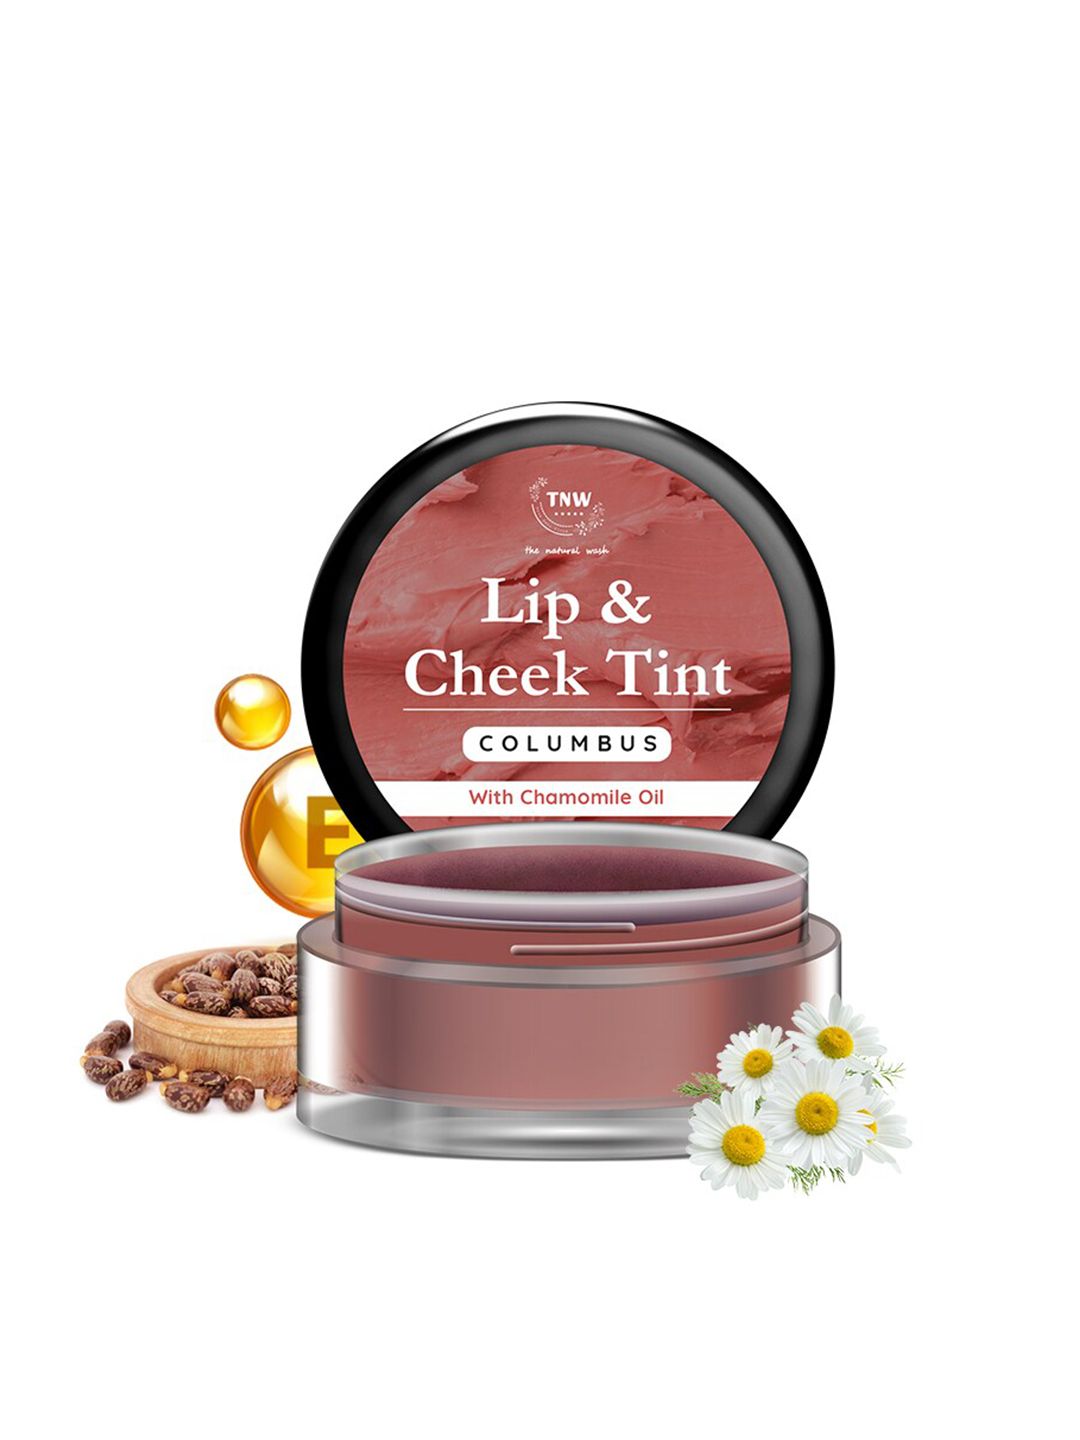 TNW the natural wash Columbus Lip & Cheek Tint with Chamomile Oil Price in India